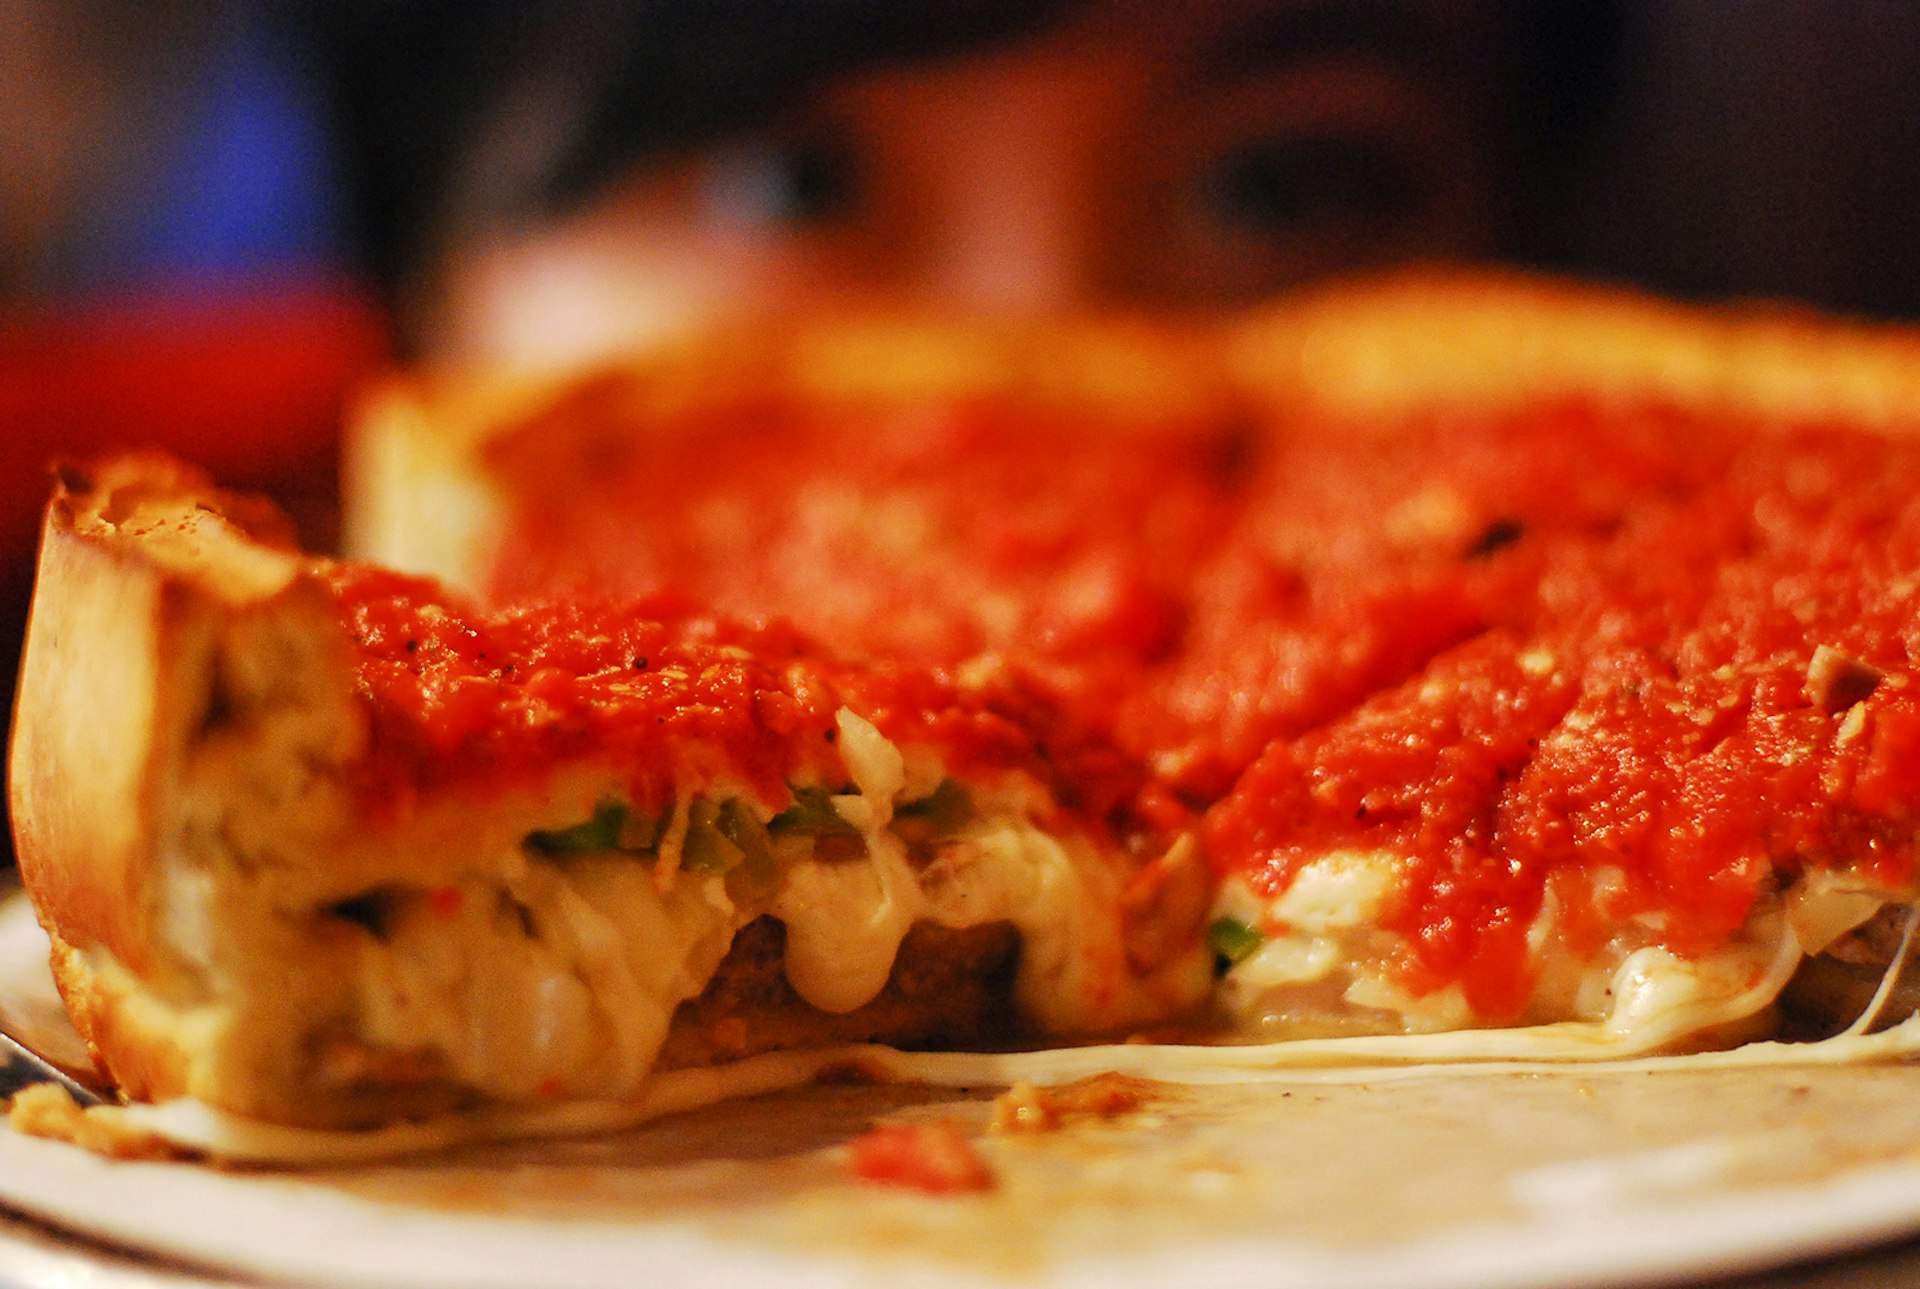 cheesy, gooey and piping hot slice of chicago pizza 